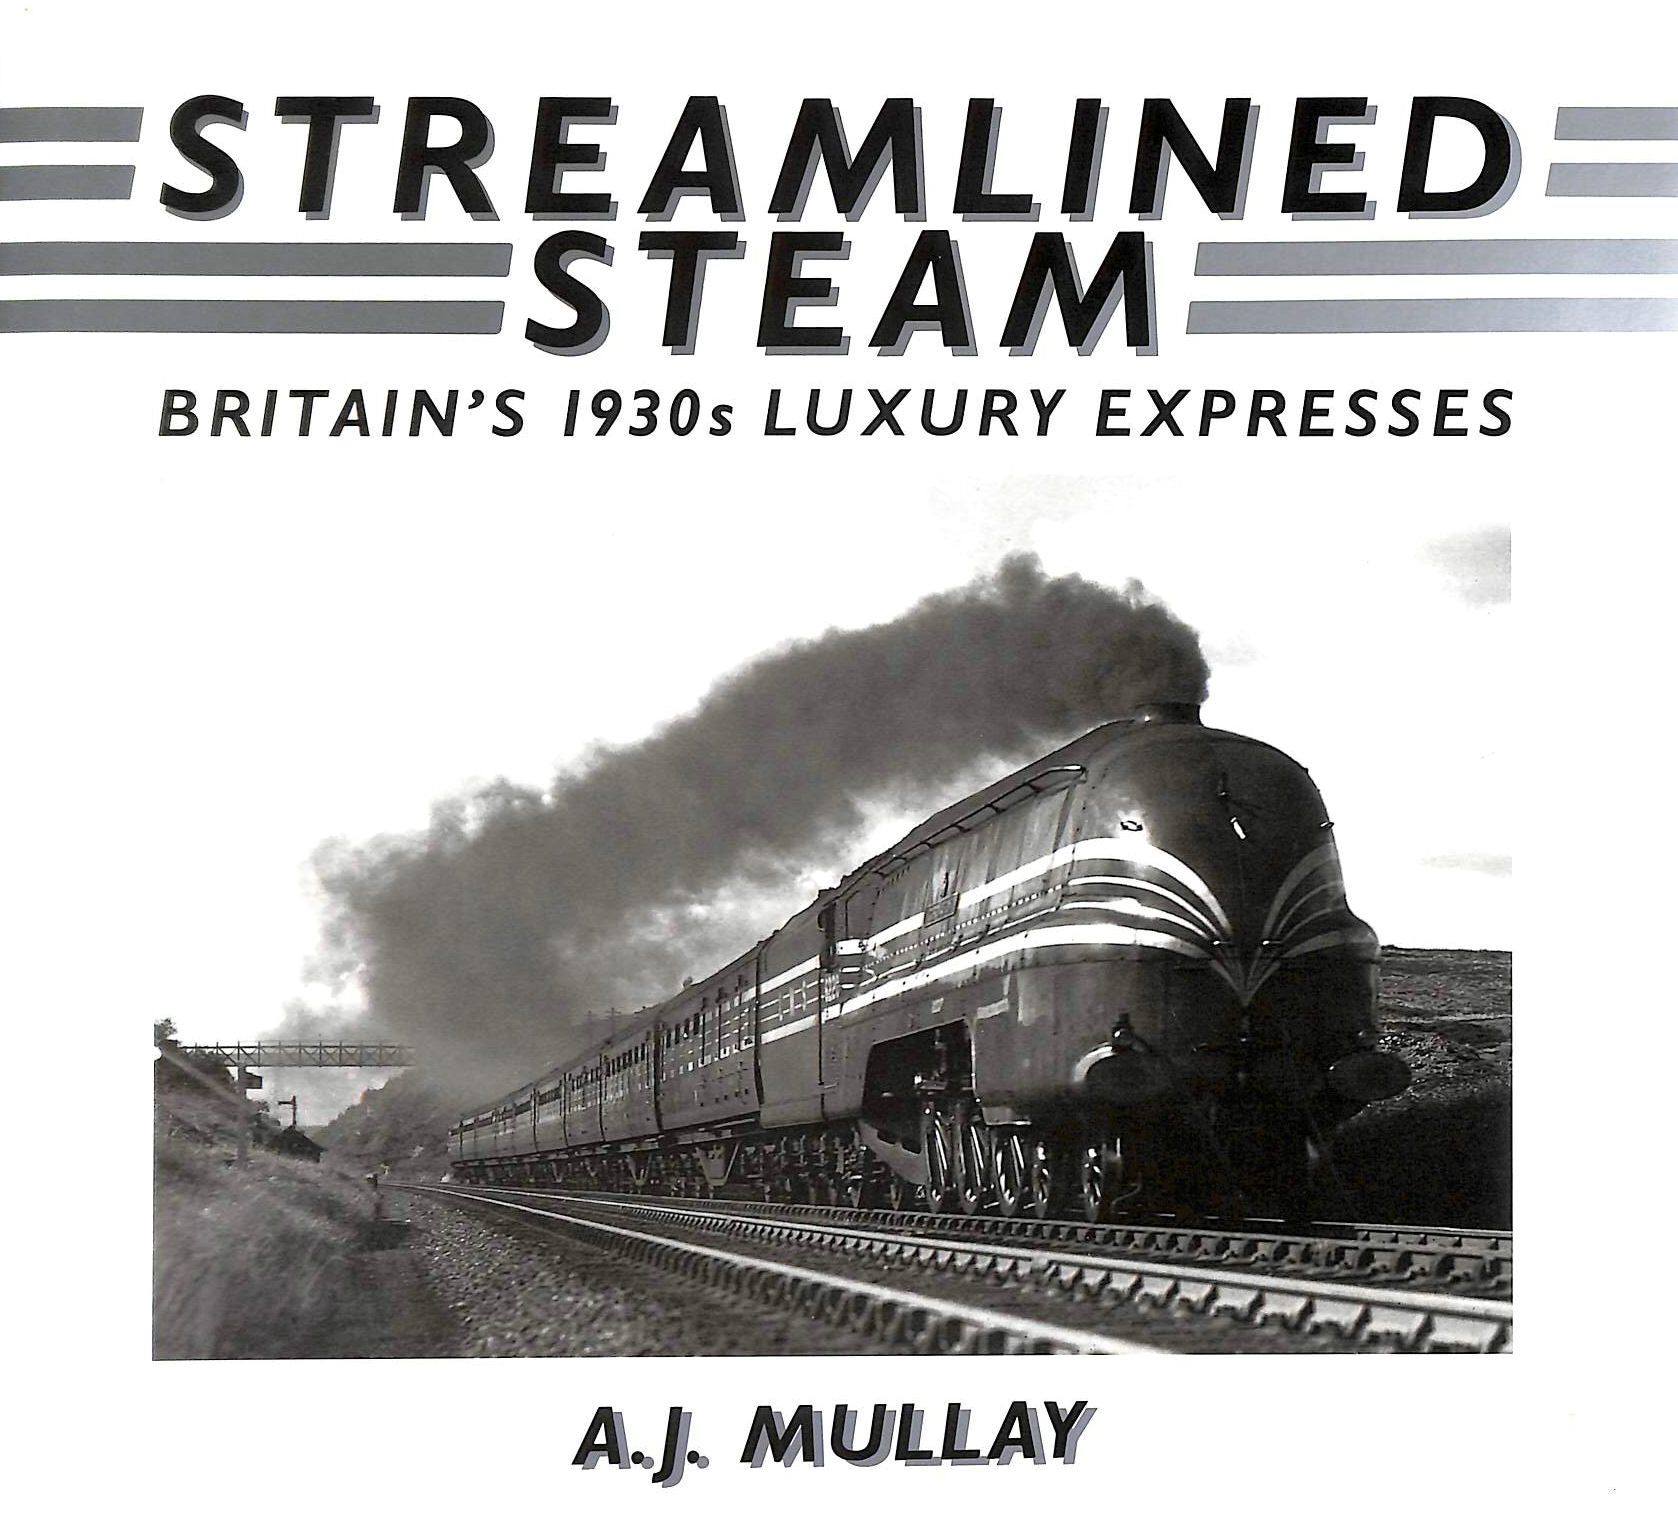 MULLAY, A. J. - Streamlined Steam: Britain's 1930s Luxury Expresses